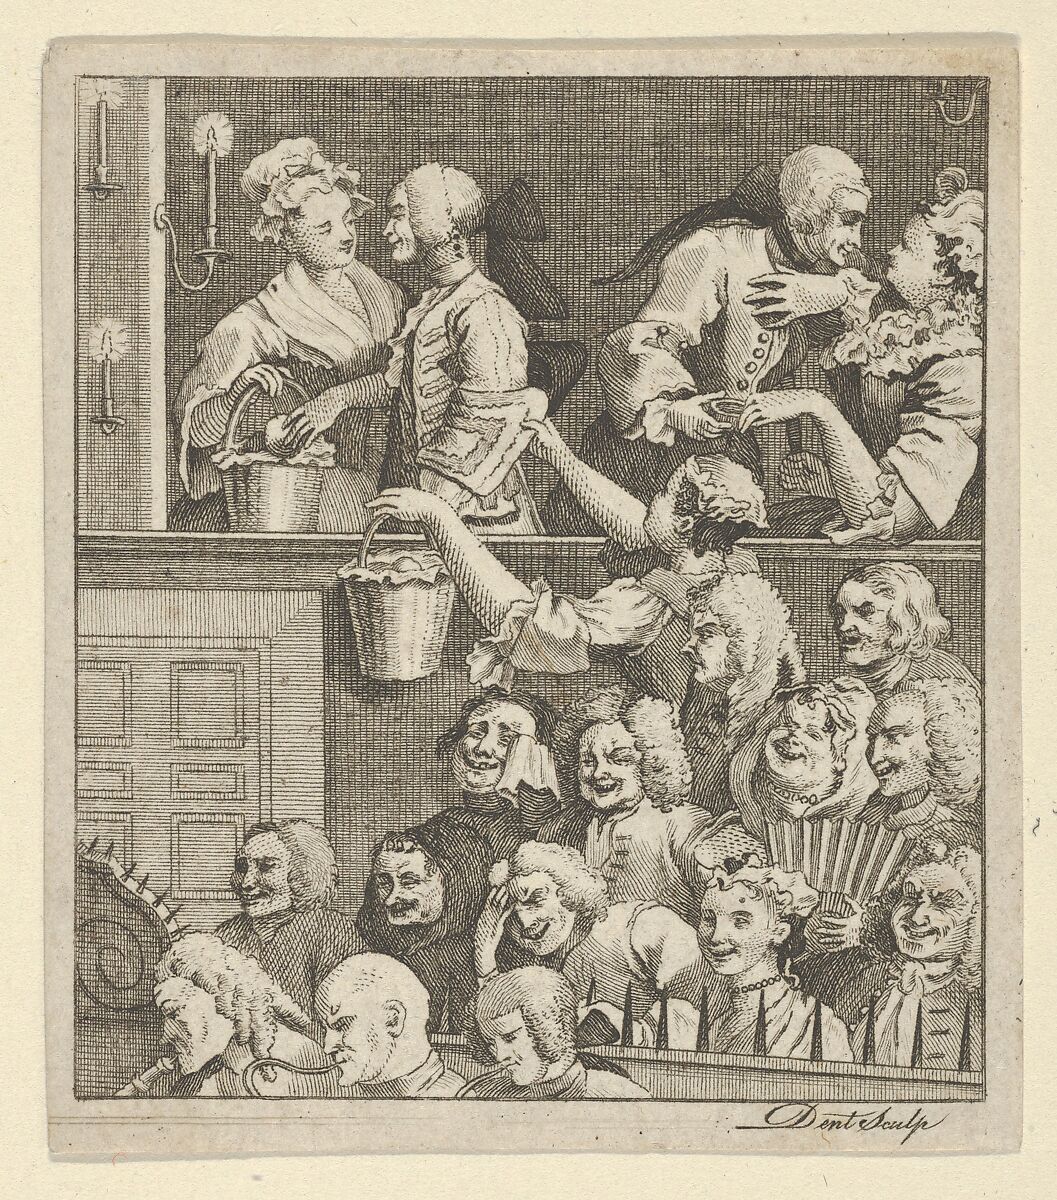 The Laughing Audience, Dent (British, active ca. 1800), Engraving 